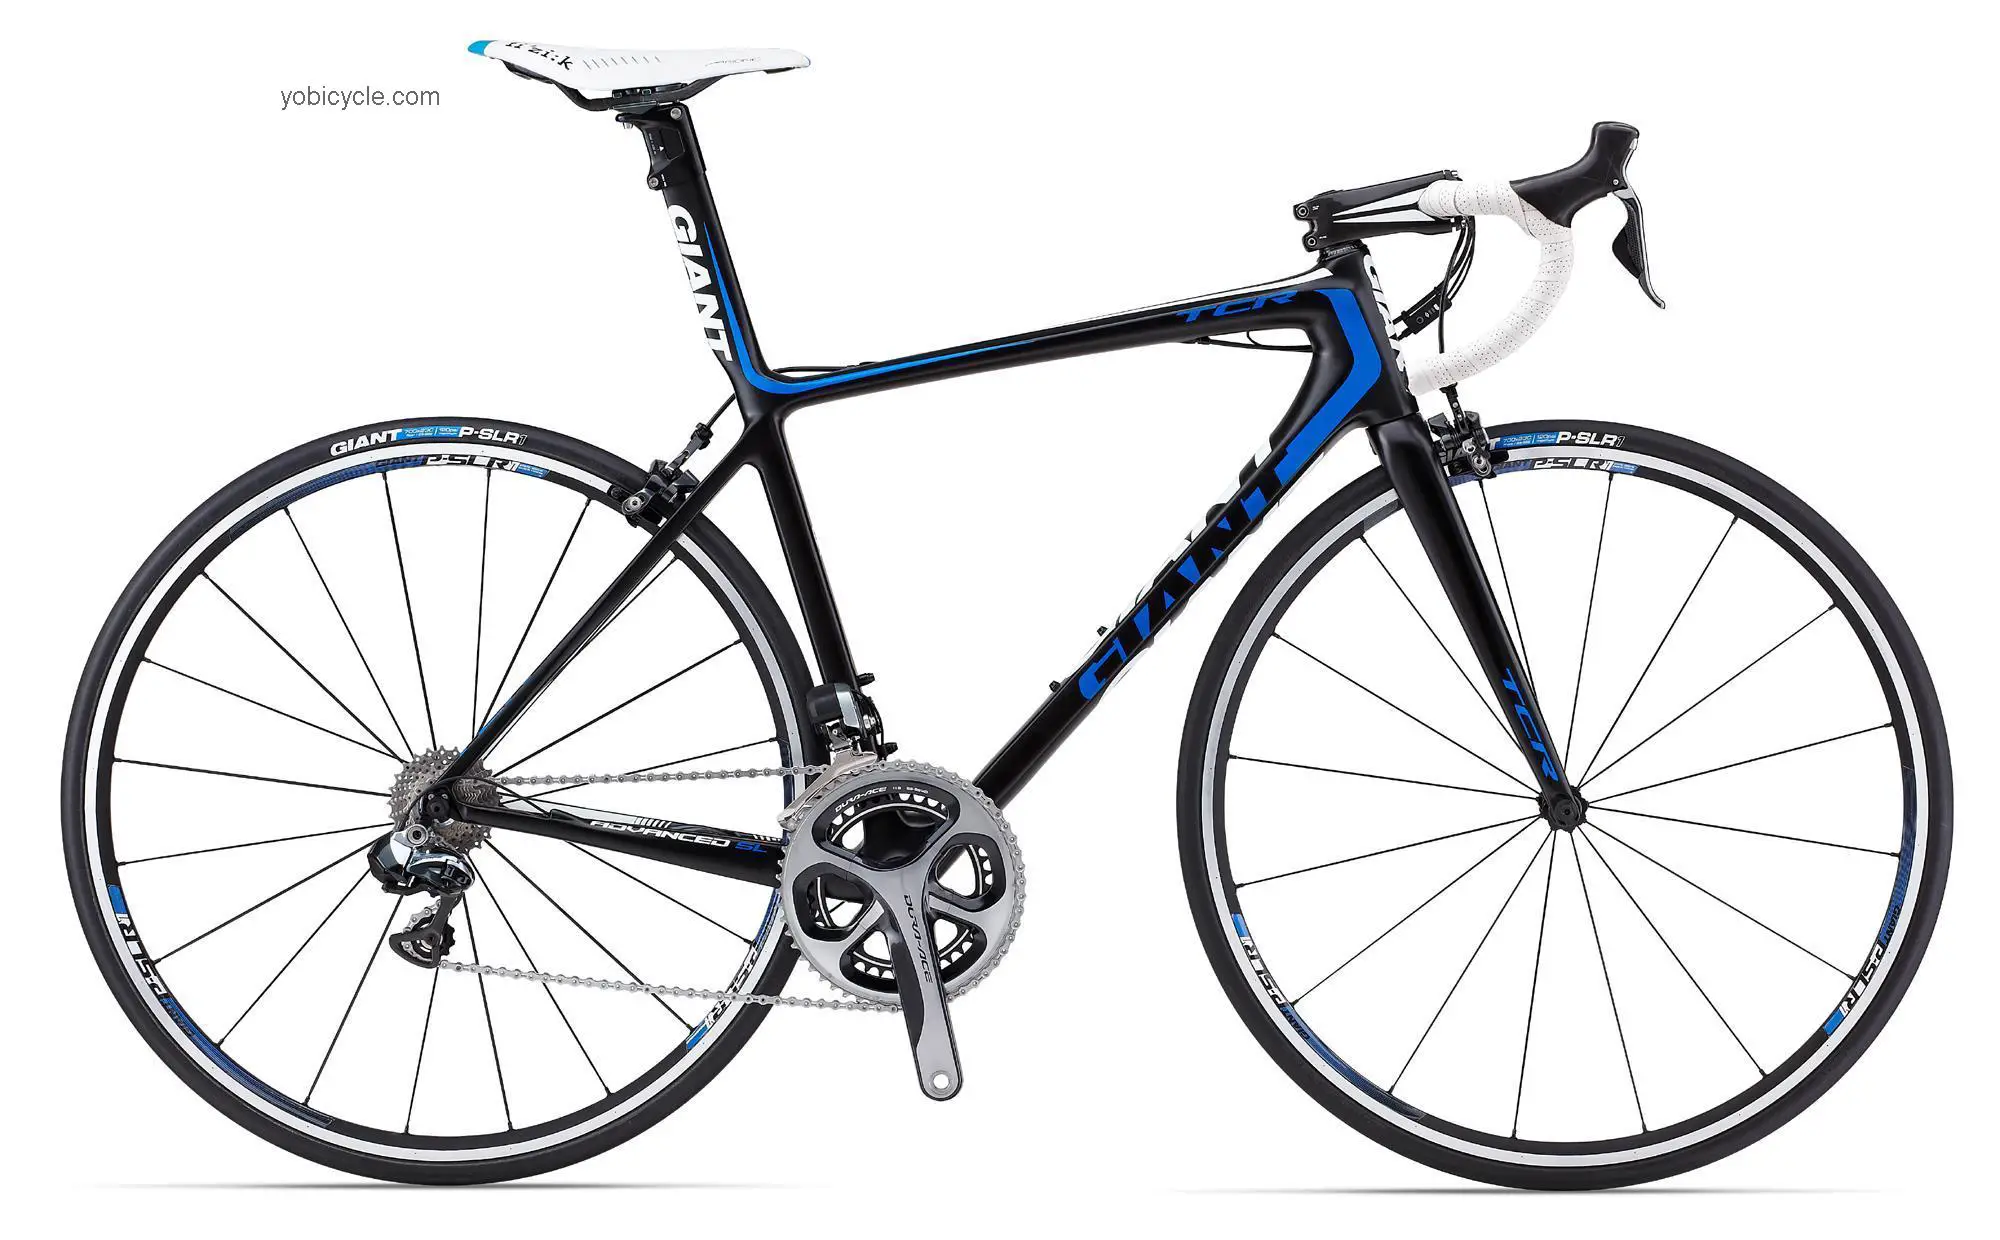 Giant TCR Advanced SL 0 2013 comparison online with competitors